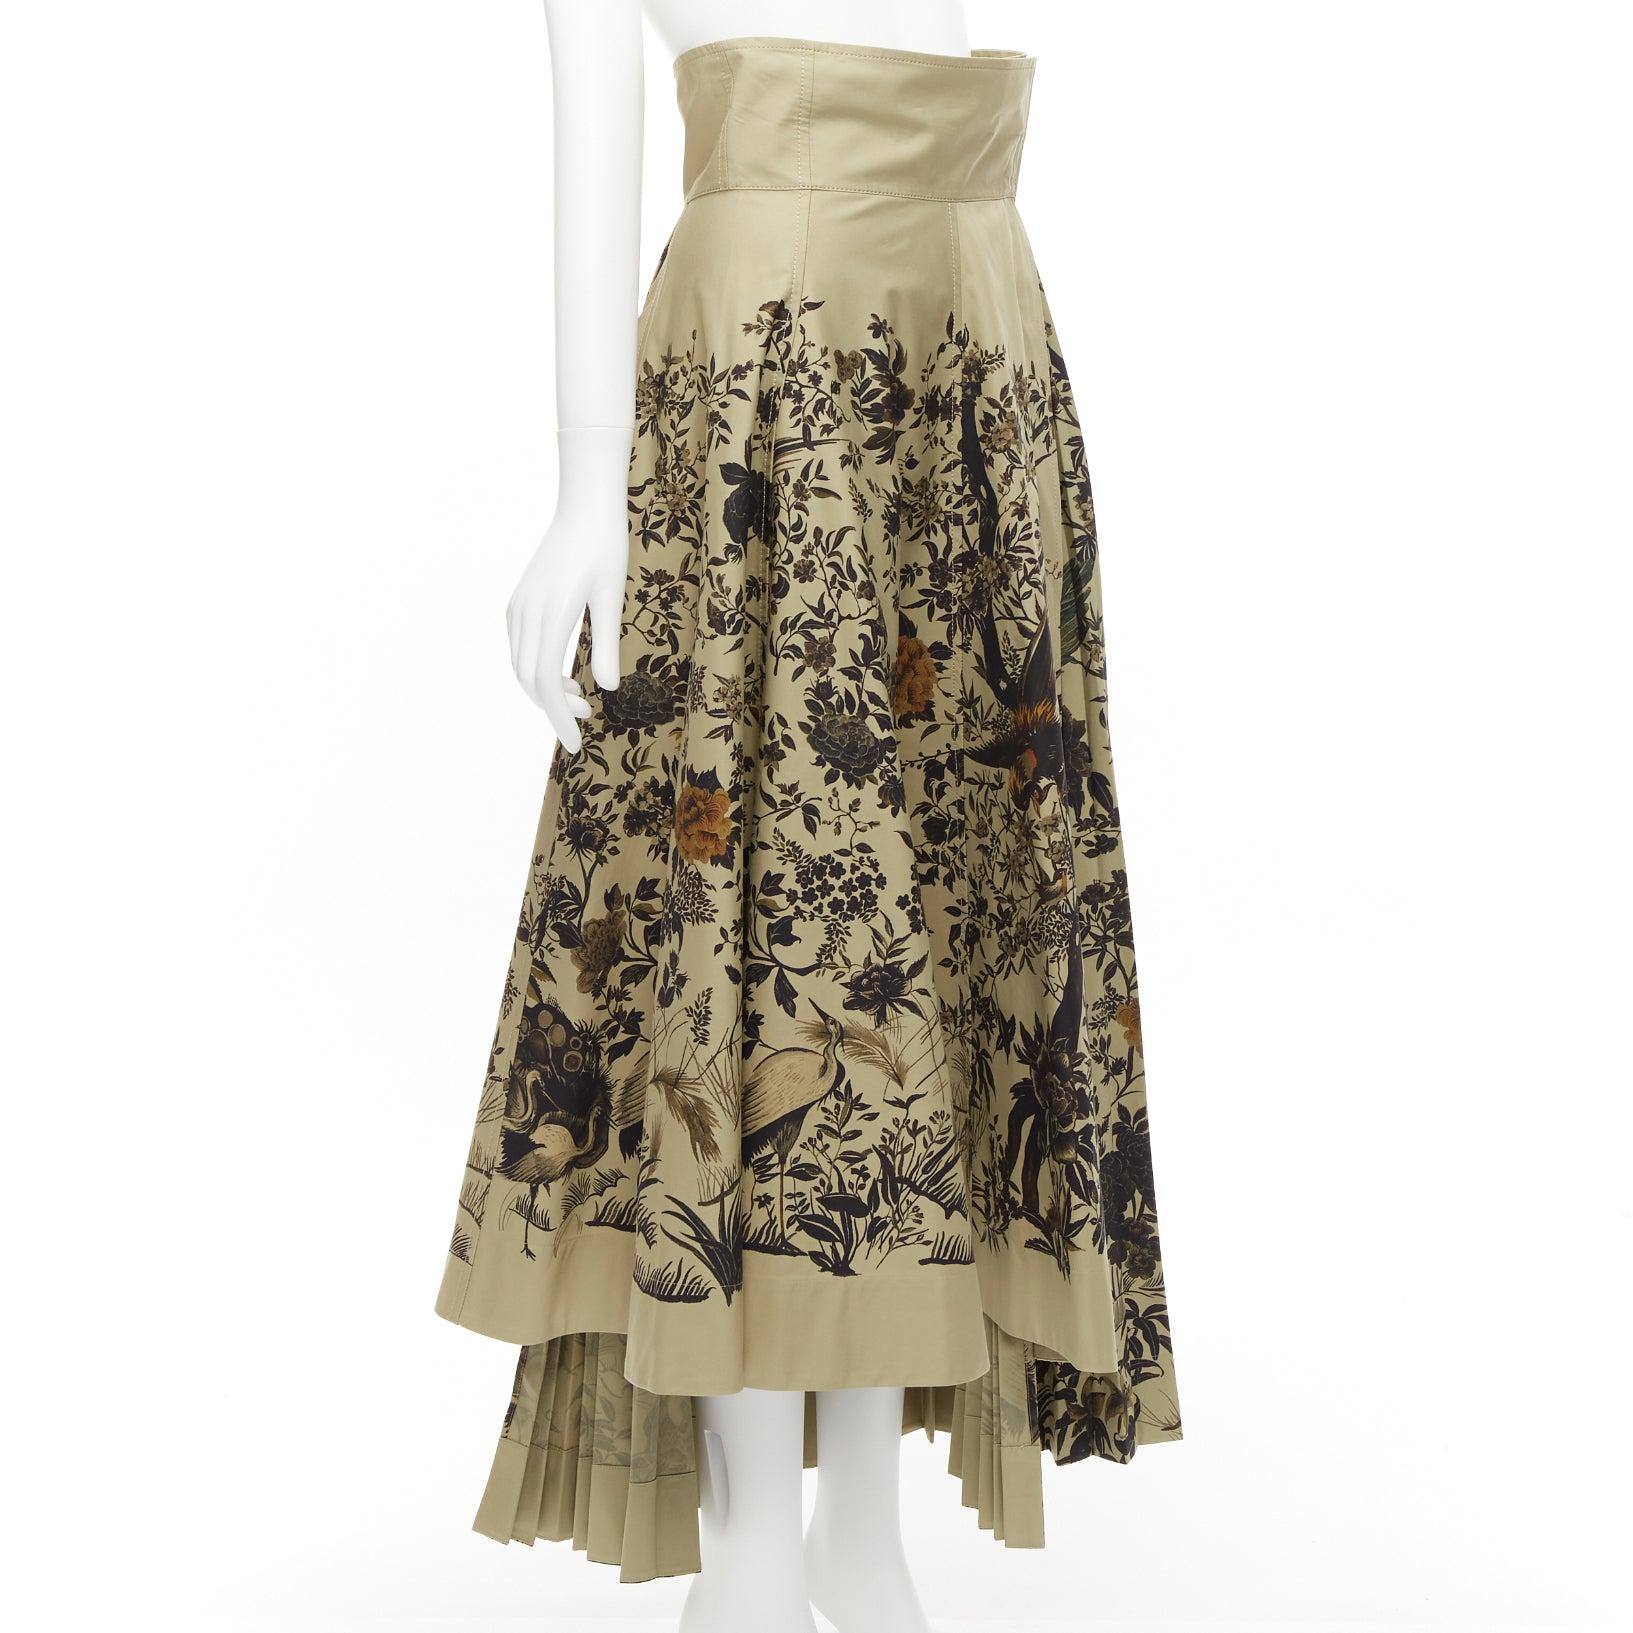 CHRISTIAN DIOR 2022 Jardin D'Hiver Runway khaki bird floral skirt FR36 S
Reference: AAWC/A00601
Brand: Dior
Designer: Maria Grazia Chiuri
Collection: 2022 Jardin dhiver - Runway
Material: Cotton
Color: Khaki
Pattern: Floral
Closure: Hook & Bar
Extra